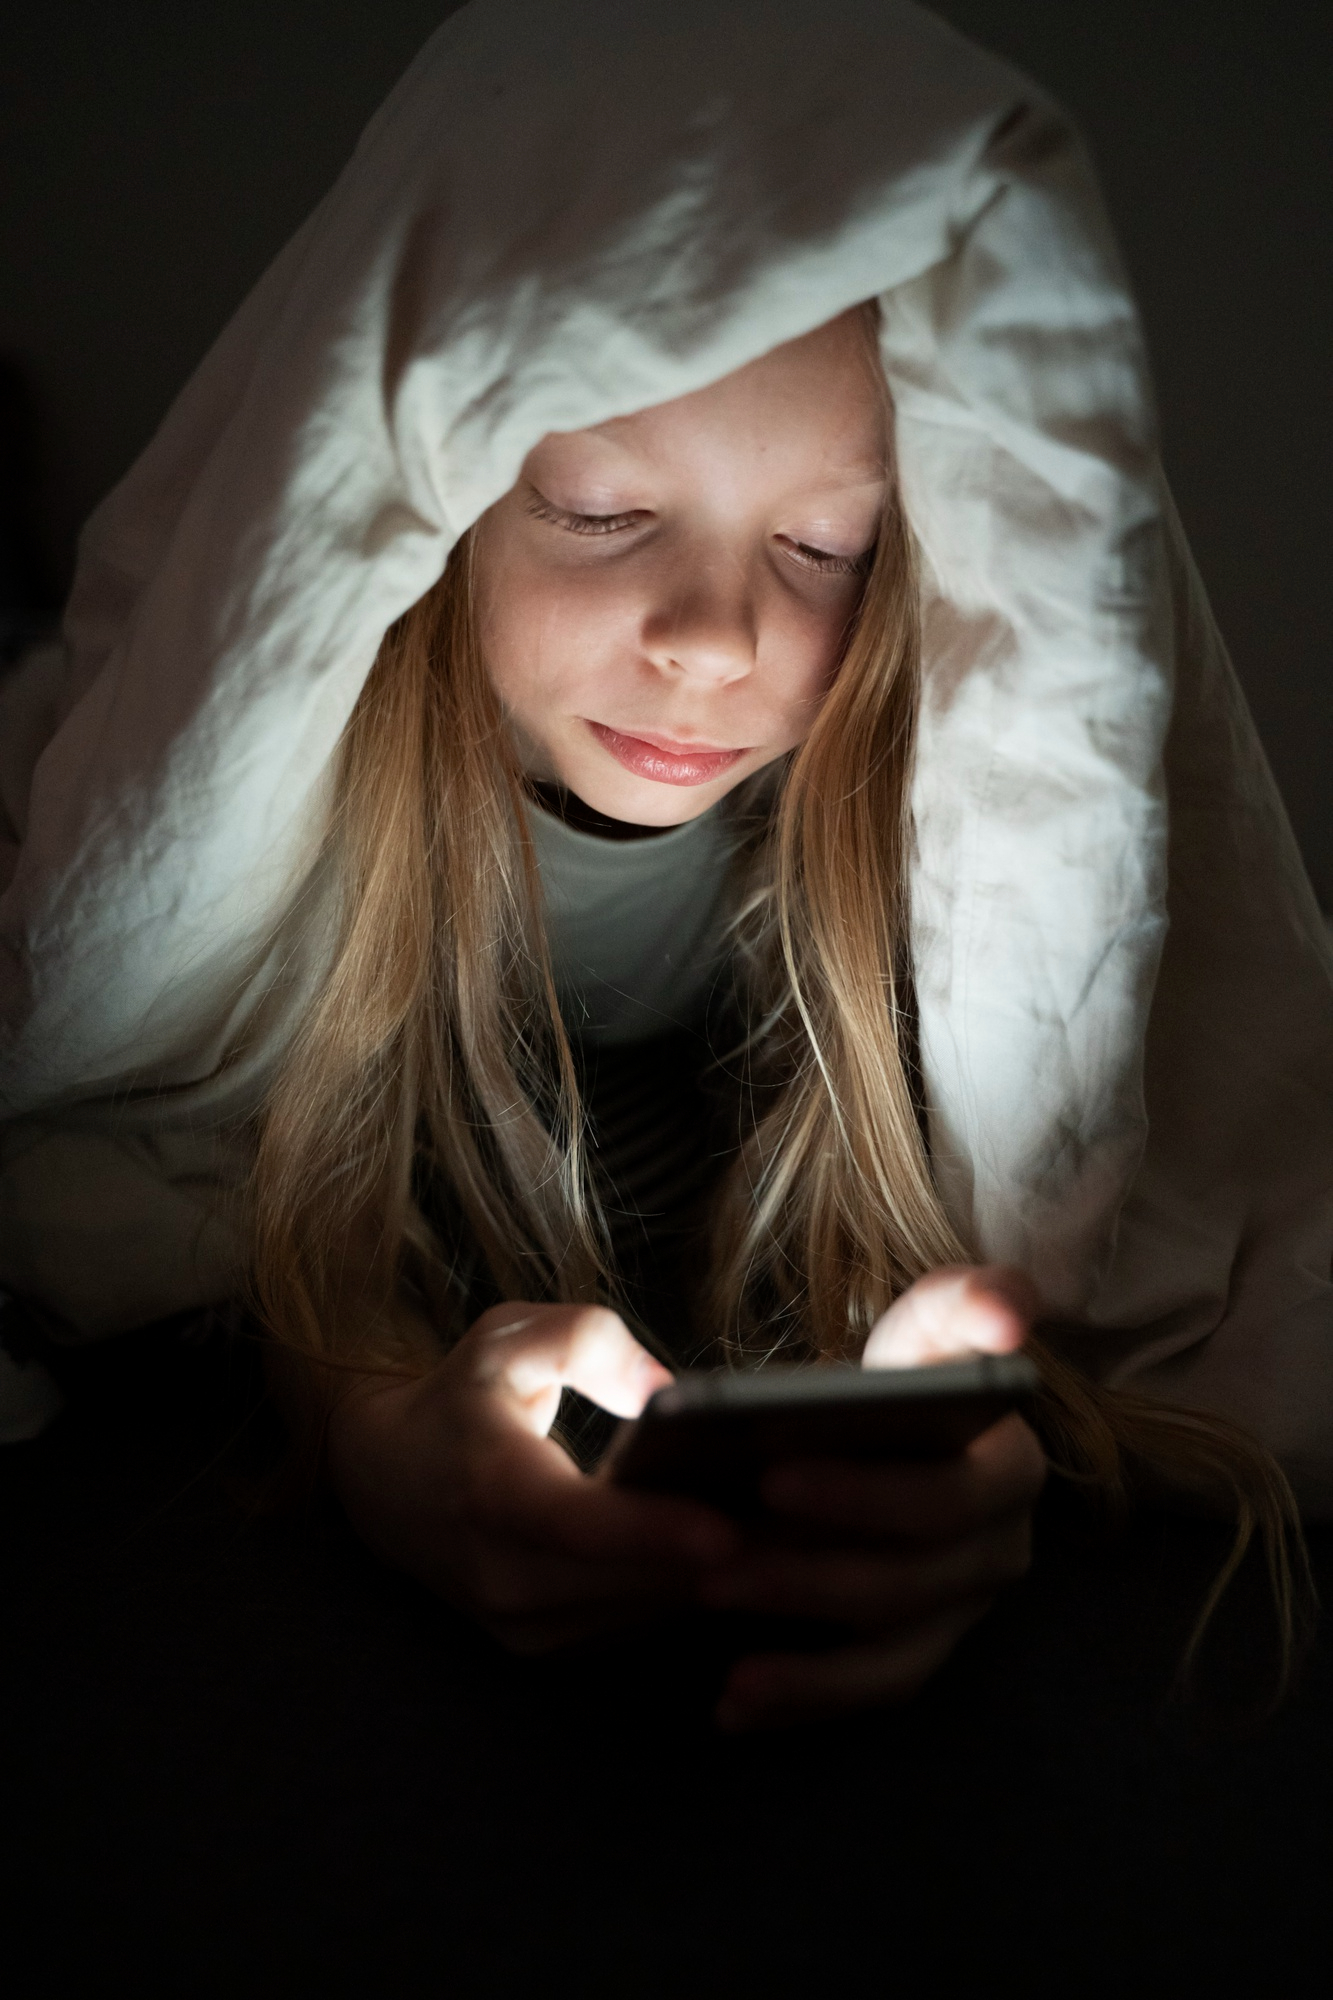 A little girl covered in a blanket while using her phone | Source: Freepik